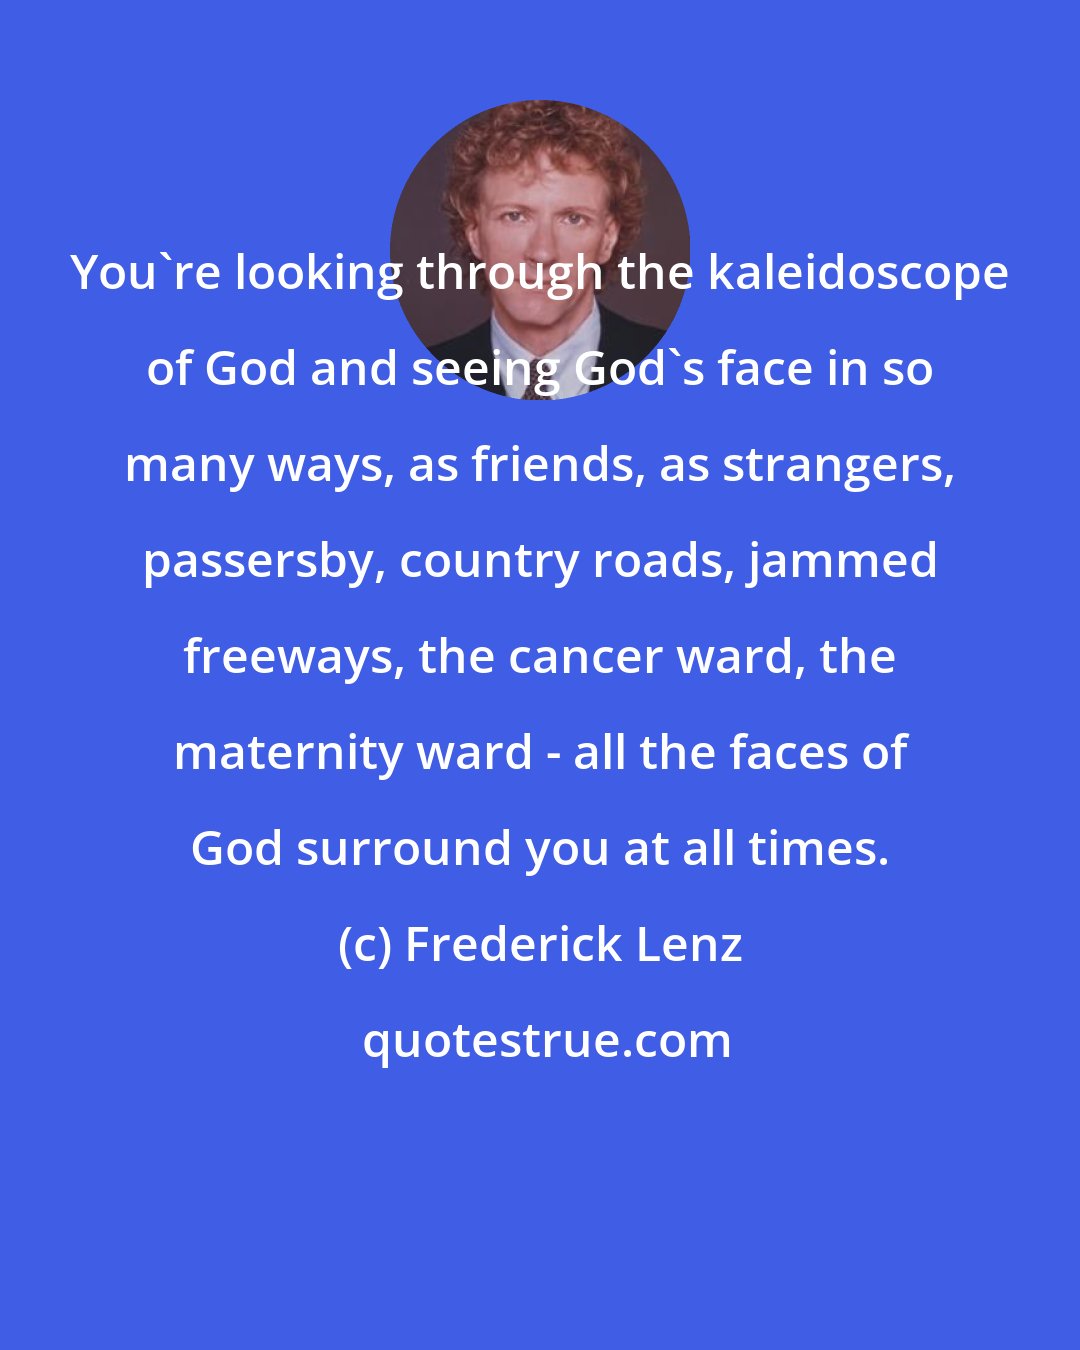 Frederick Lenz: You're looking through the kaleidoscope of God and seeing God's face in so many ways, as friends, as strangers, passersby, country roads, jammed freeways, the cancer ward, the maternity ward - all the faces of God surround you at all times.